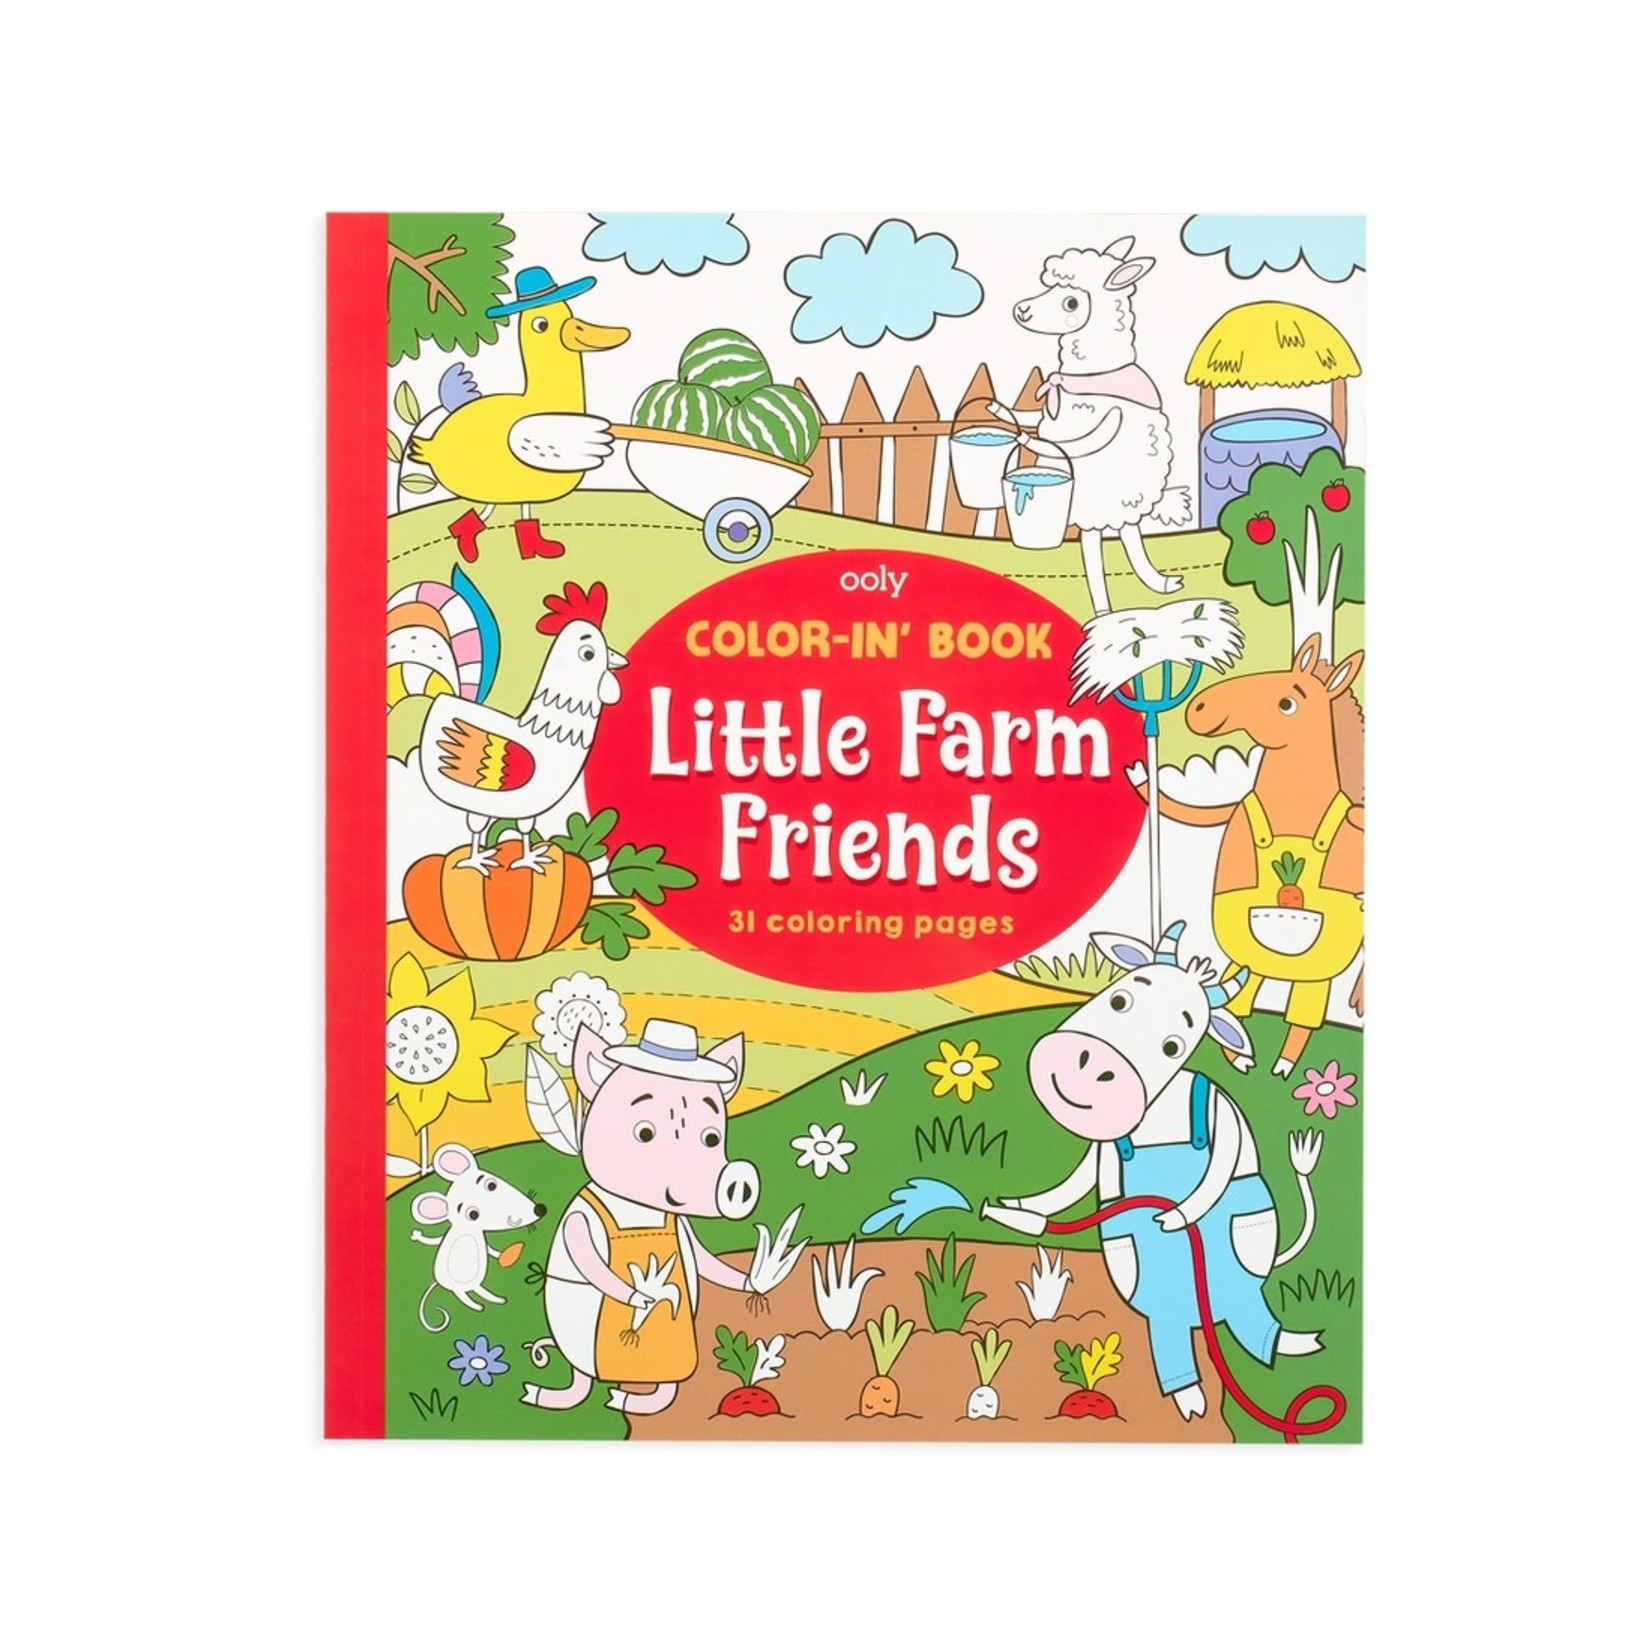 OOLY Color-in' Book: Little Farm Friends